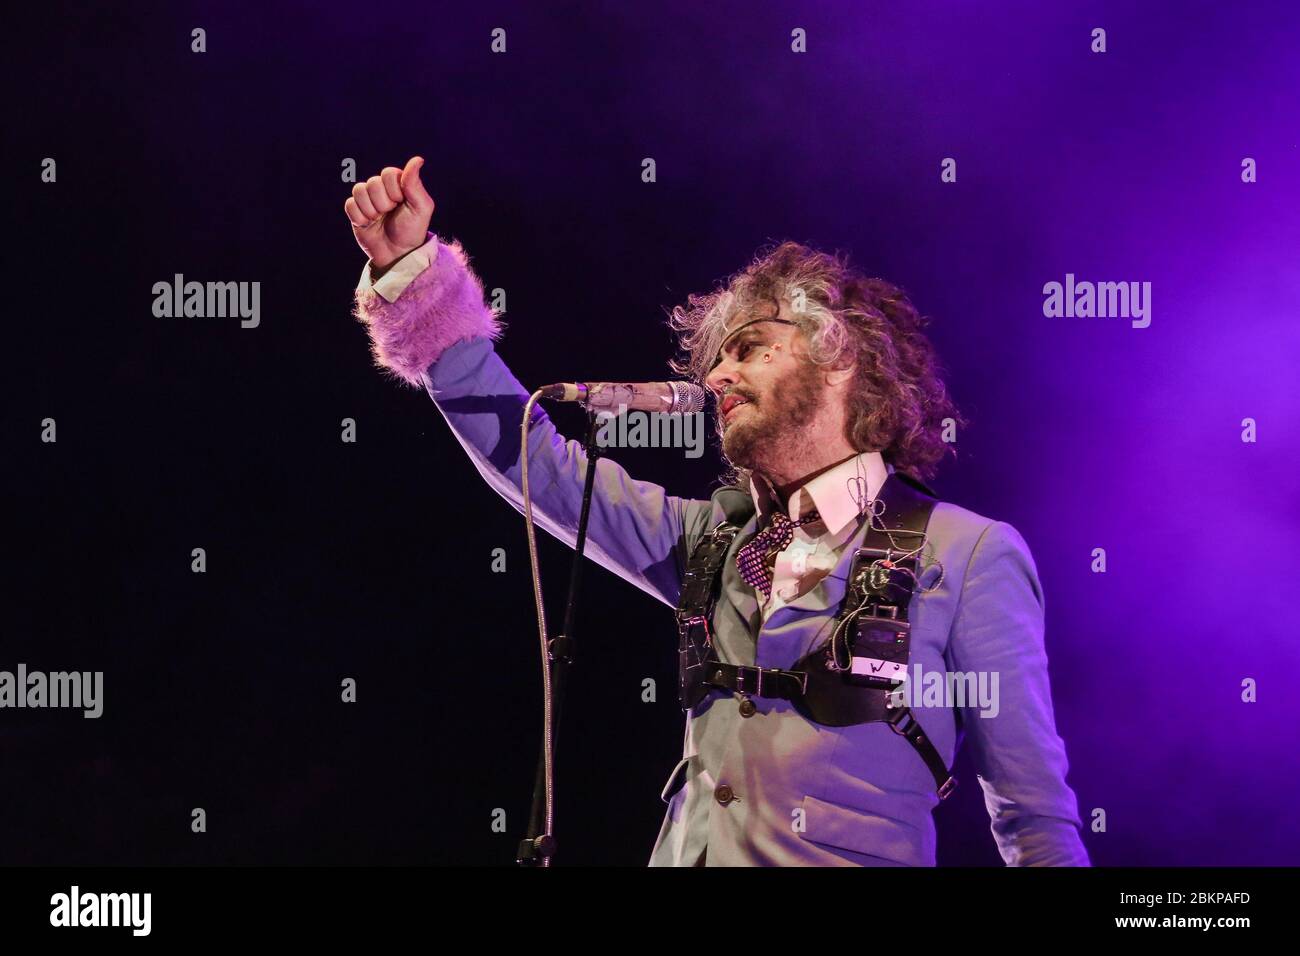 Singer Wayne Coyne of the Flaming Lips, as the band performs at the 2018 Bluedot Festival held at Jodrell Bank in Cheshire, UK. Stock Photo